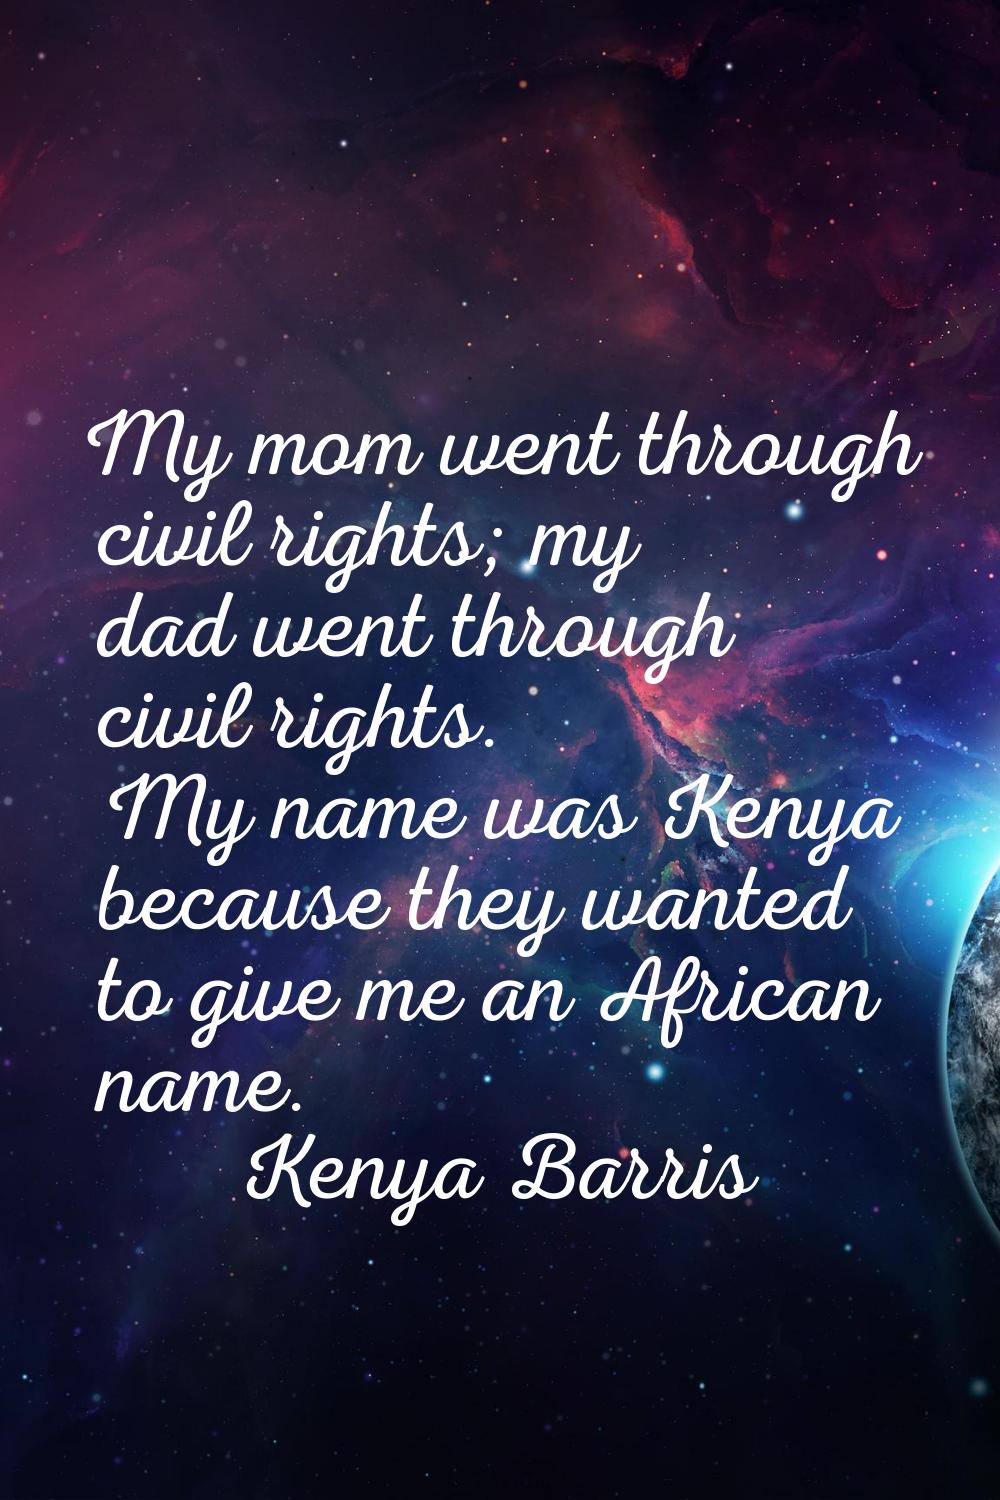 My mom went through civil rights; my dad went through civil rights. My name was Kenya because they 